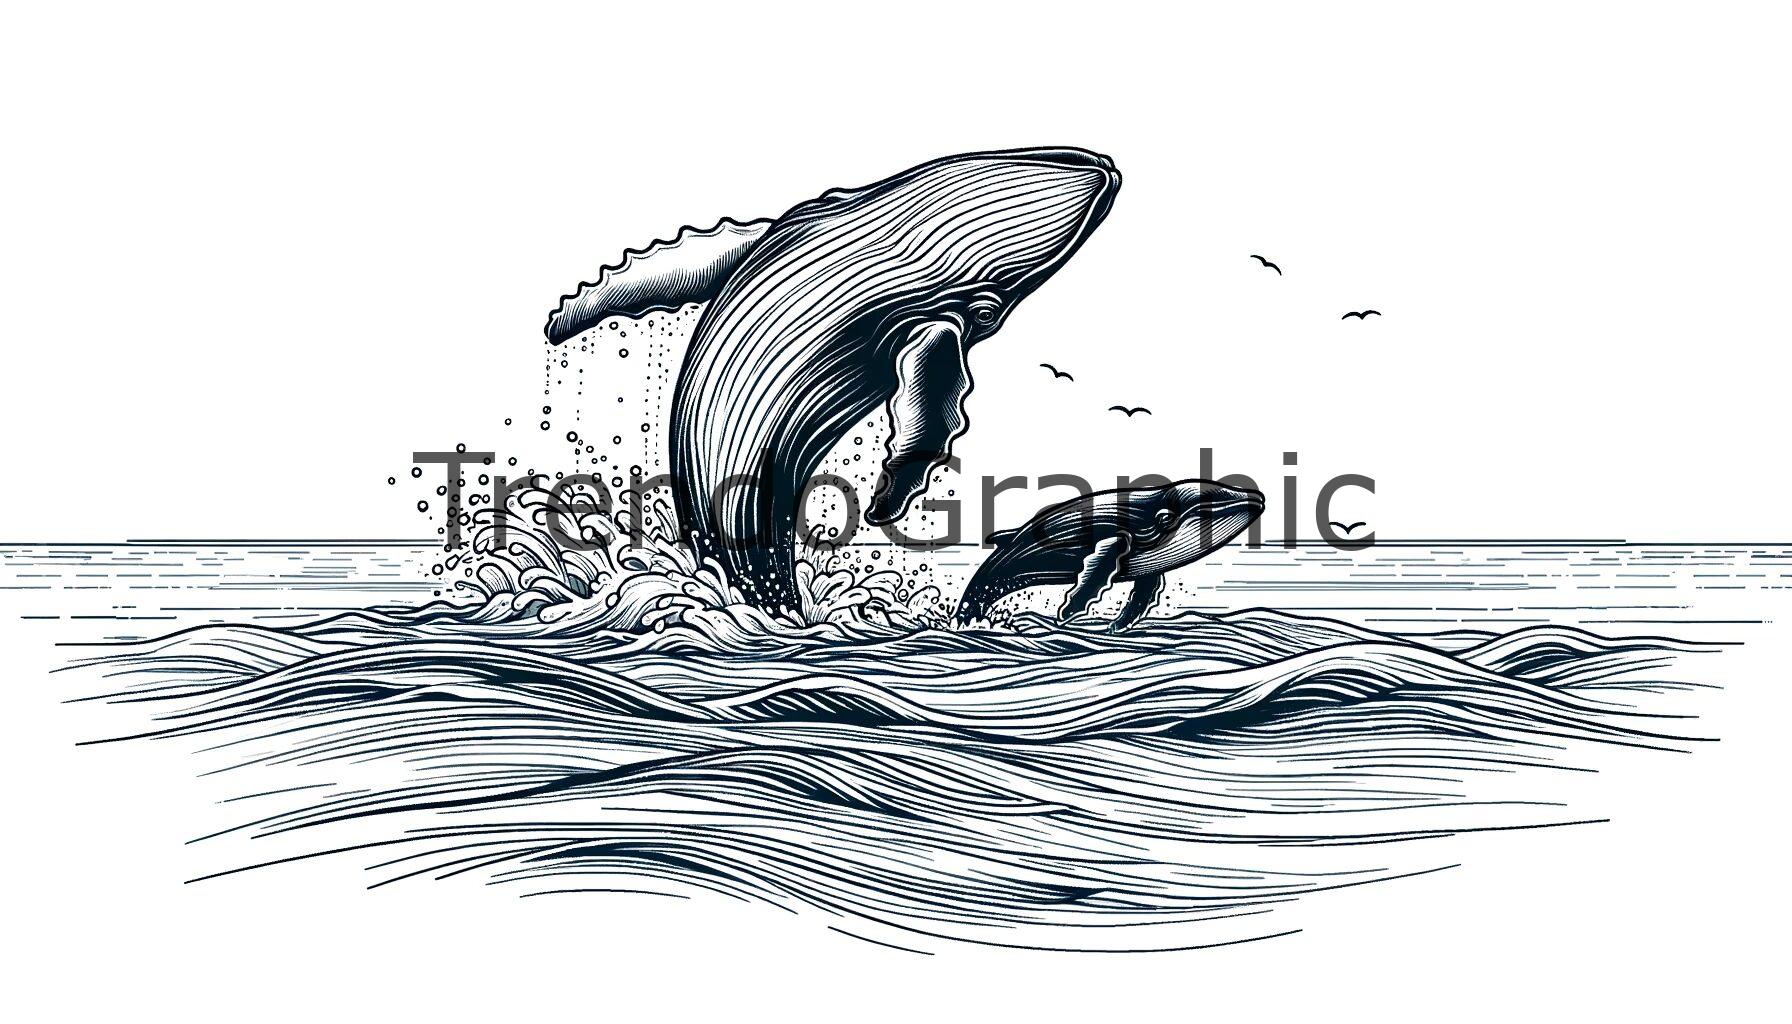 Graceful Ocean Dance: Mother Whale and Calf Breaching